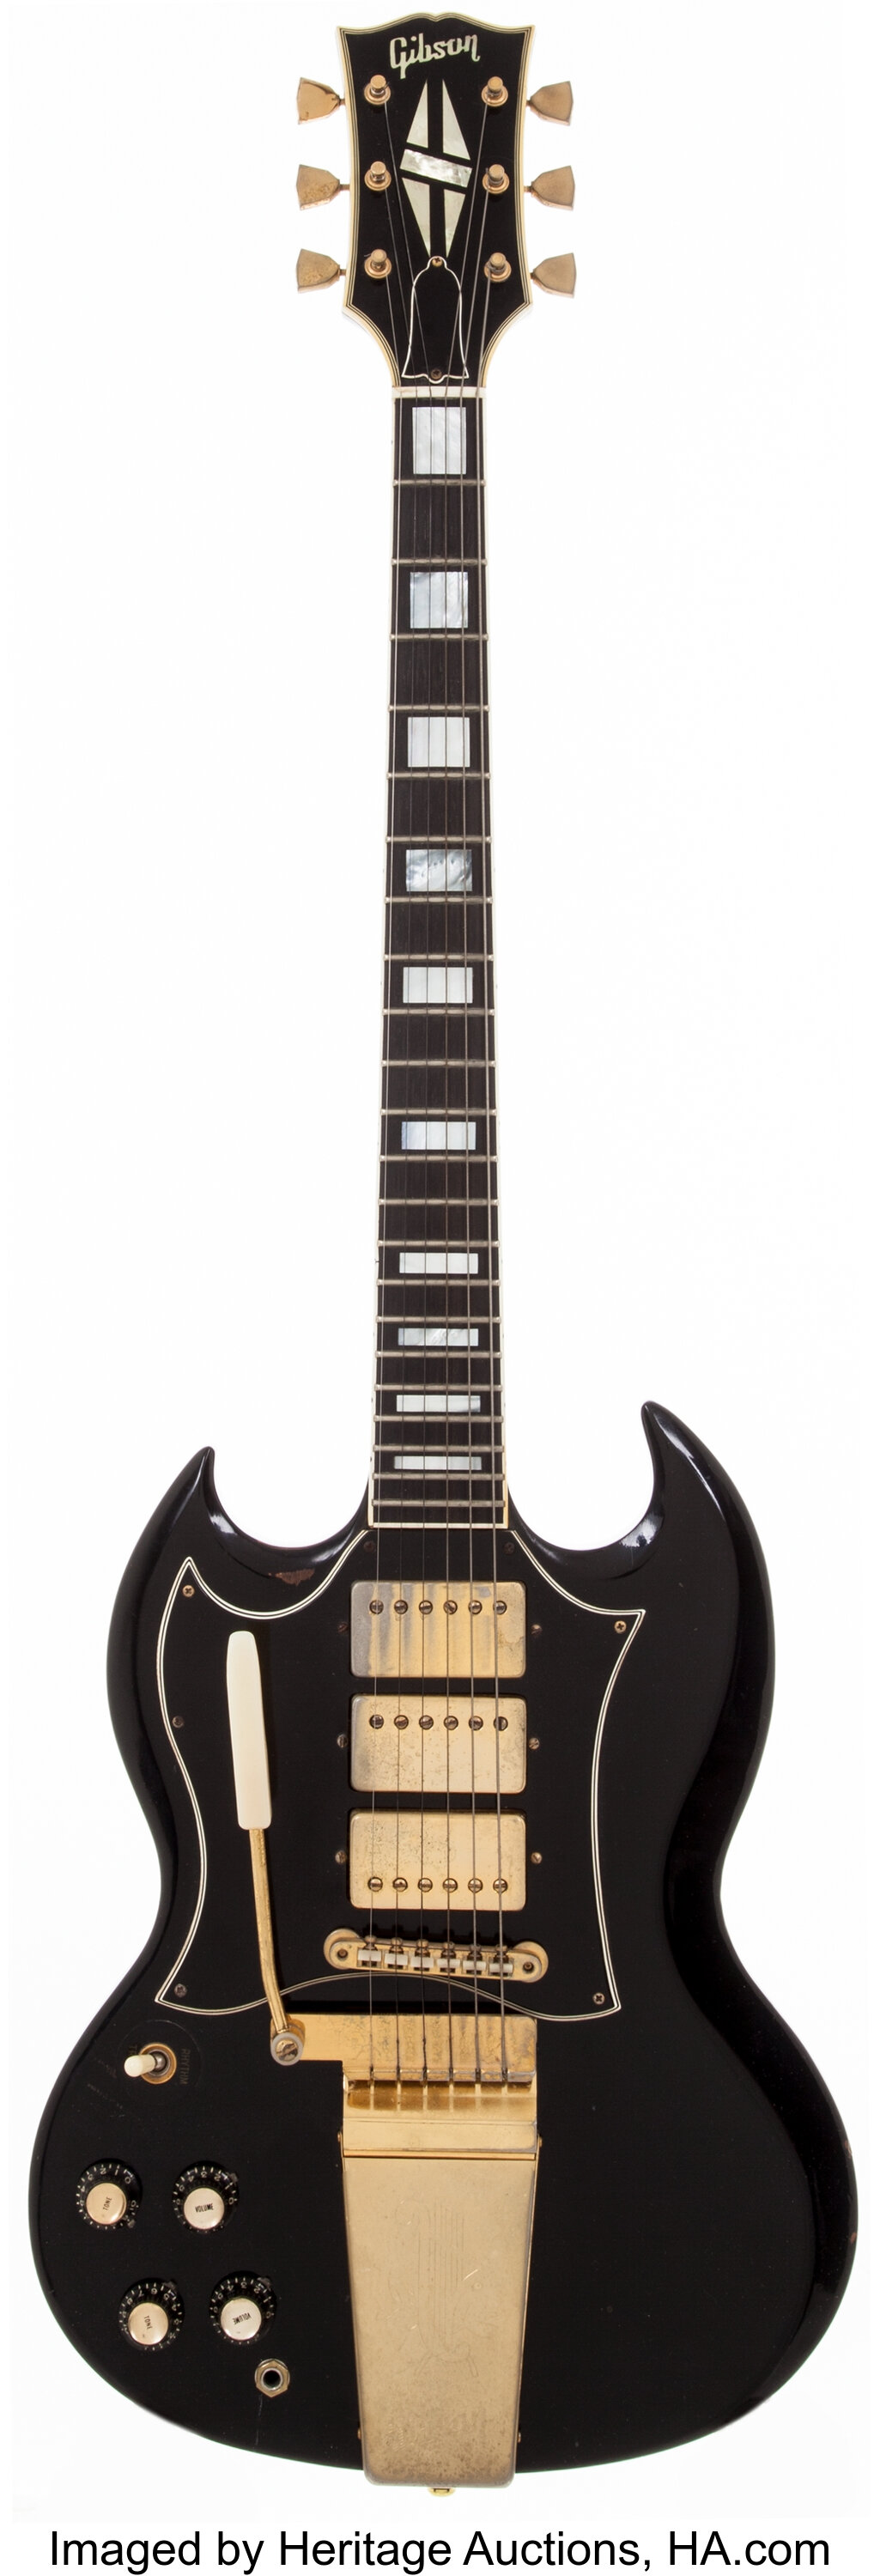 1966 Gibson SG Custom Black Left-Handed Solid Body Guitar, | #51078 | Heritage Auctions